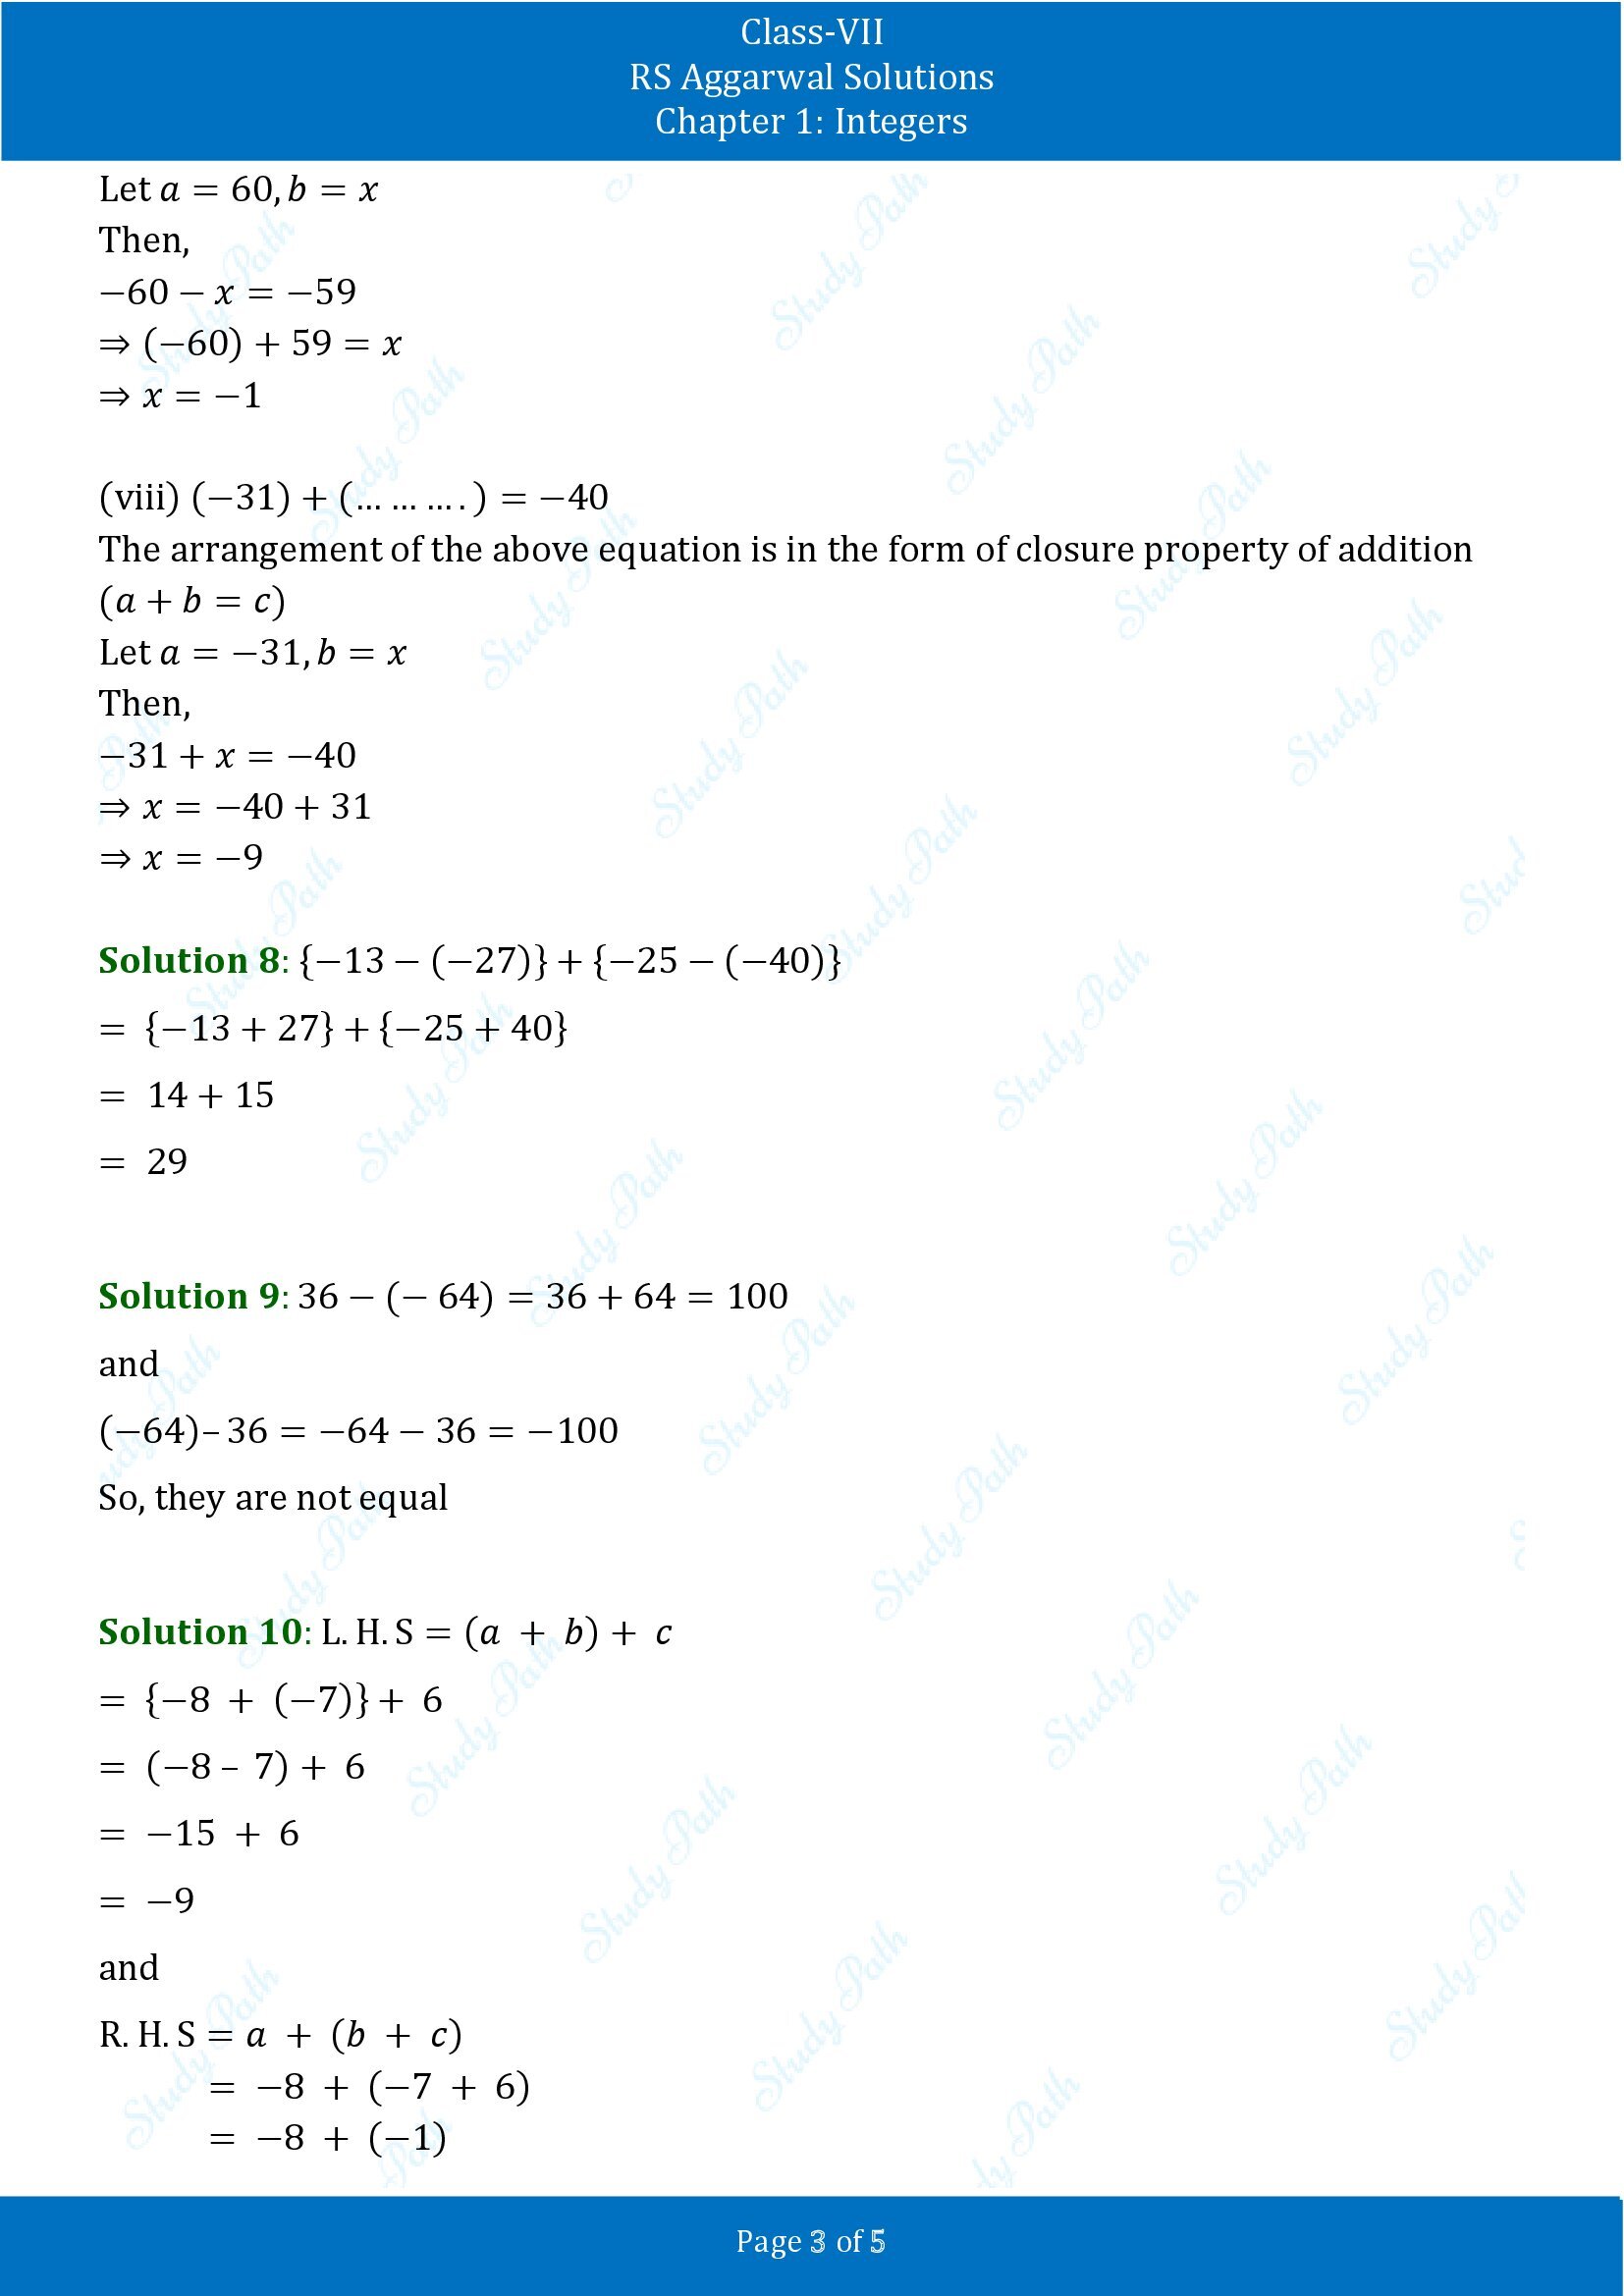 RS Aggarwal Solutions Class 7 Chapter 1 Integers Exercise 1A 0003